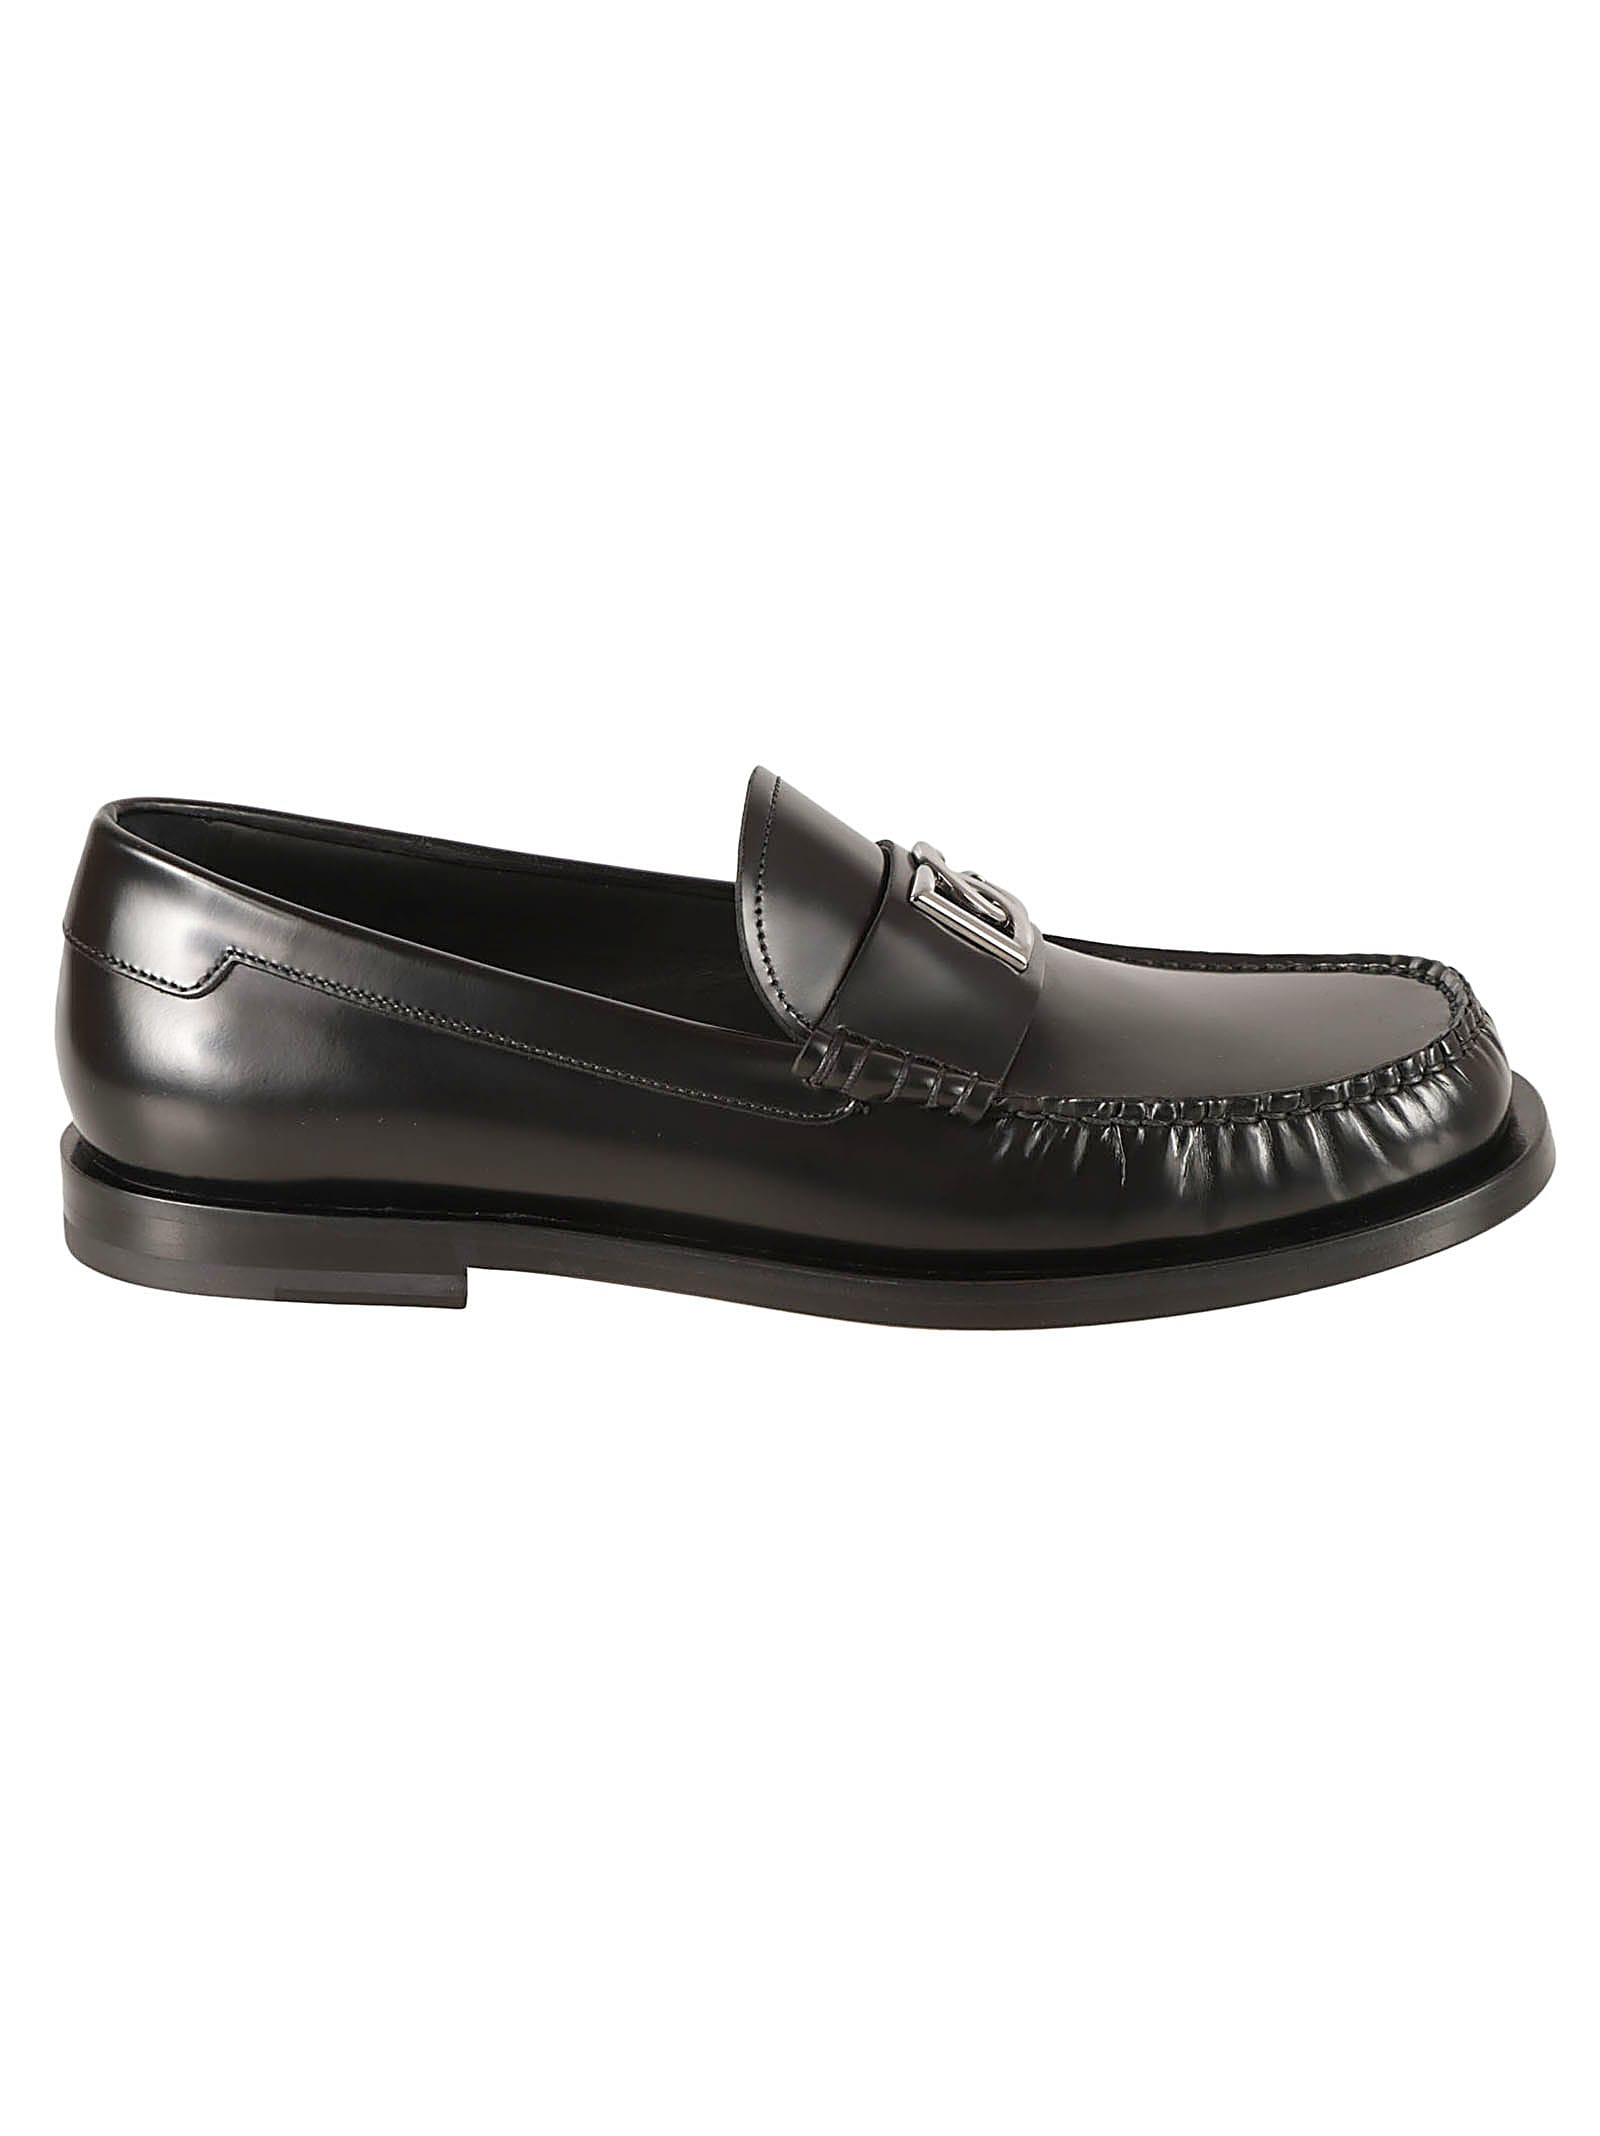 Dolce & Gabbana City Loafers In Black